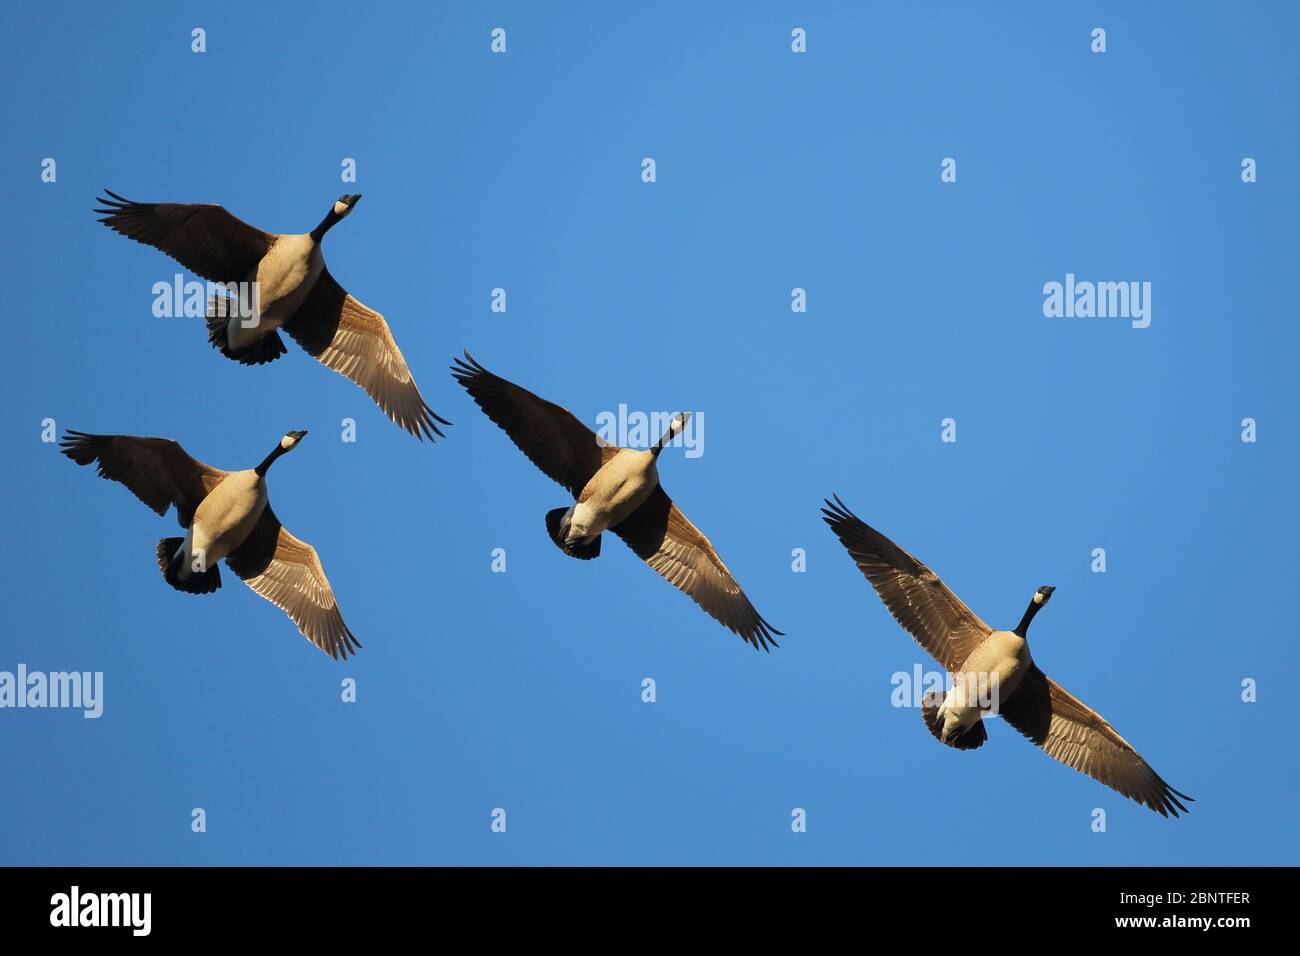 Four Canada Geese together in flight on a sunny blue sky spring day heading north on their migration path. Stock Photo